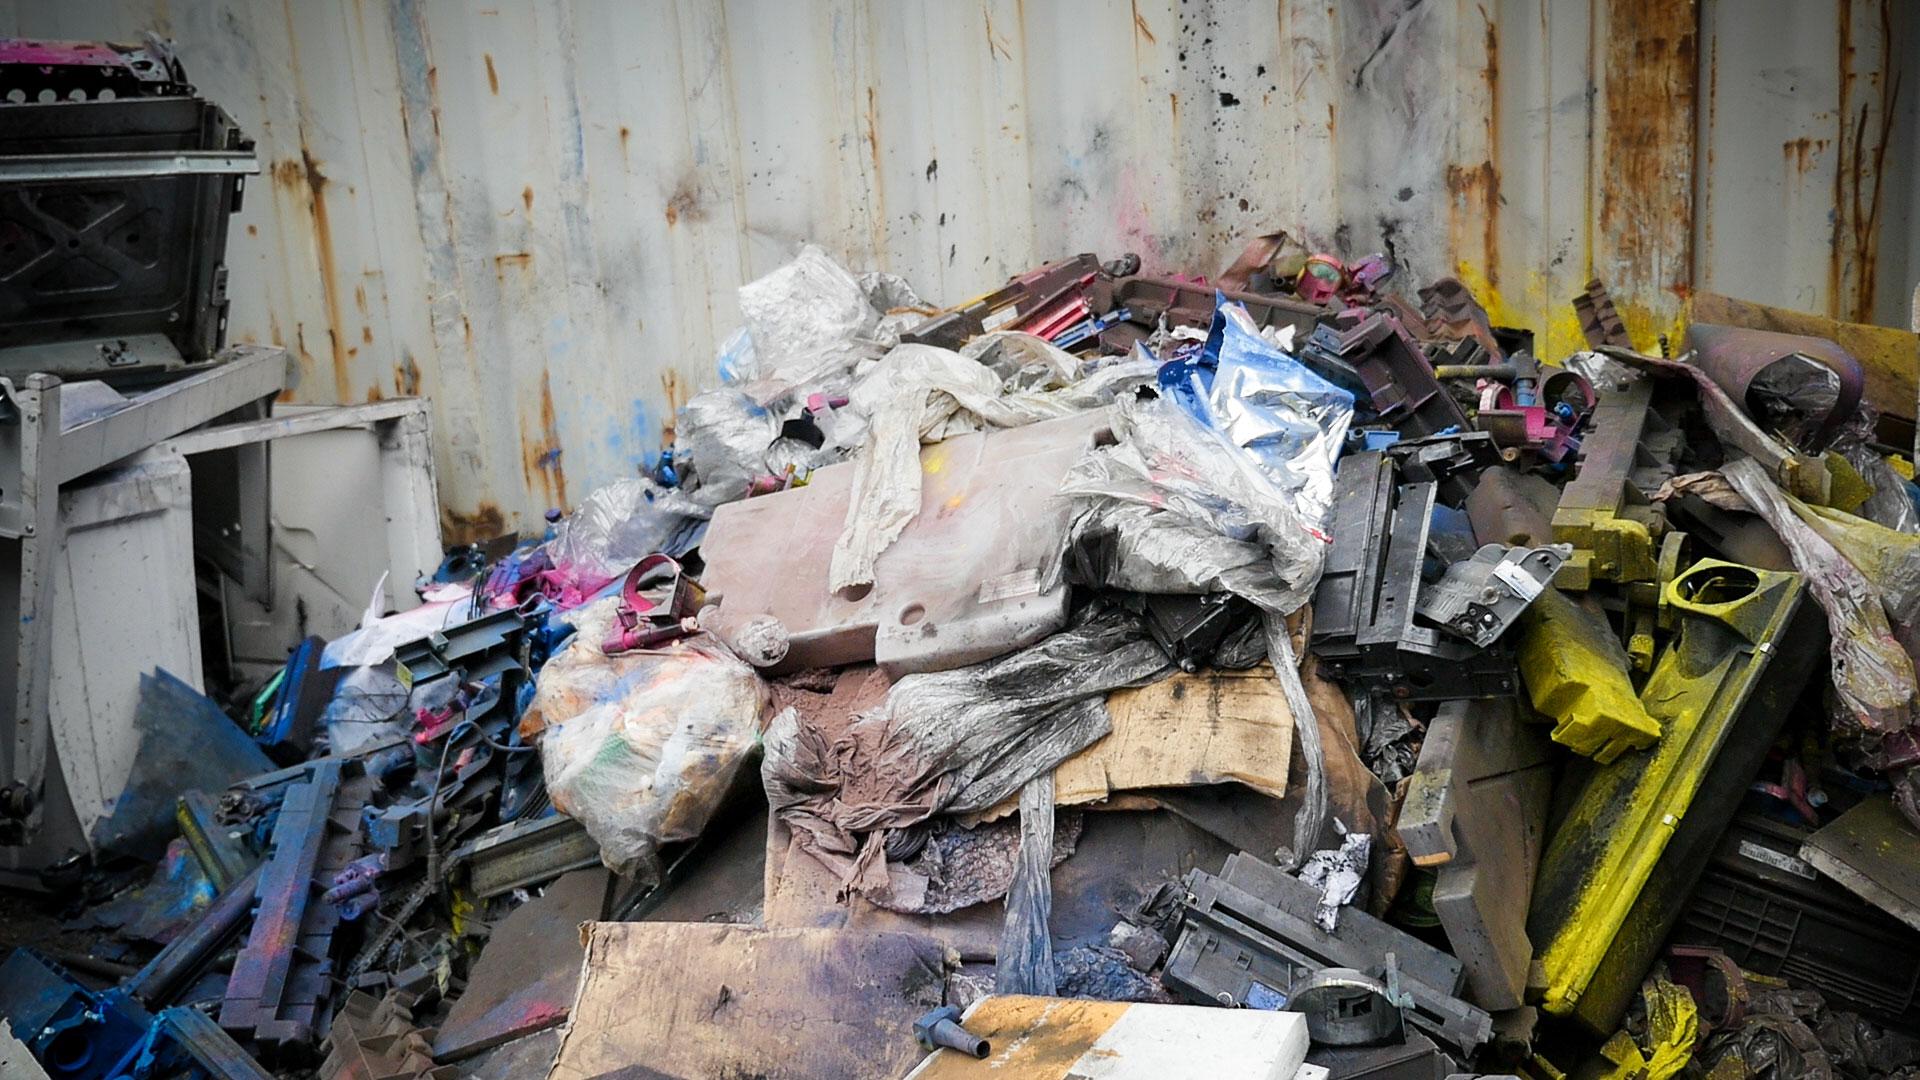 A pile of printer parts dusted with toners like carbon black, a probable carcinogen known to cause respiratory problems.